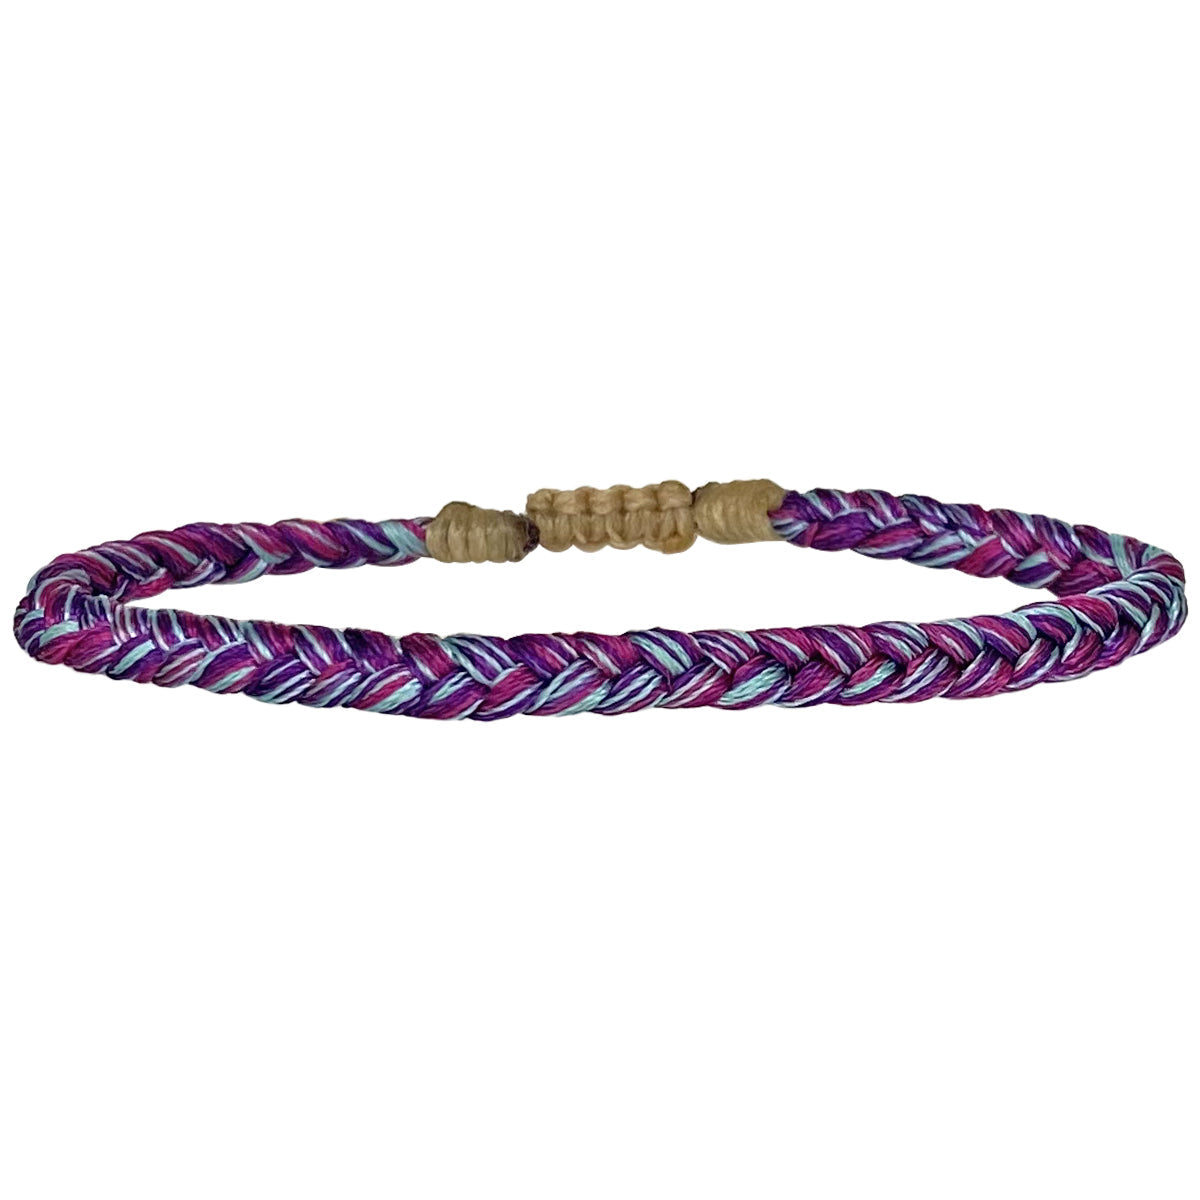 This bracelet is handwoven by our team of master artisans using polyester threads featuring a trenza design in purple and blue tones. This kids's bracelet is cool and comfortable perfect to wear everyday.  This bracelet looks great worn solo or layered with other pieces.  Details:      Polyester threads     Kids's bracelet     Adjustable bracelet     Width 4mm     Can be worn in the water